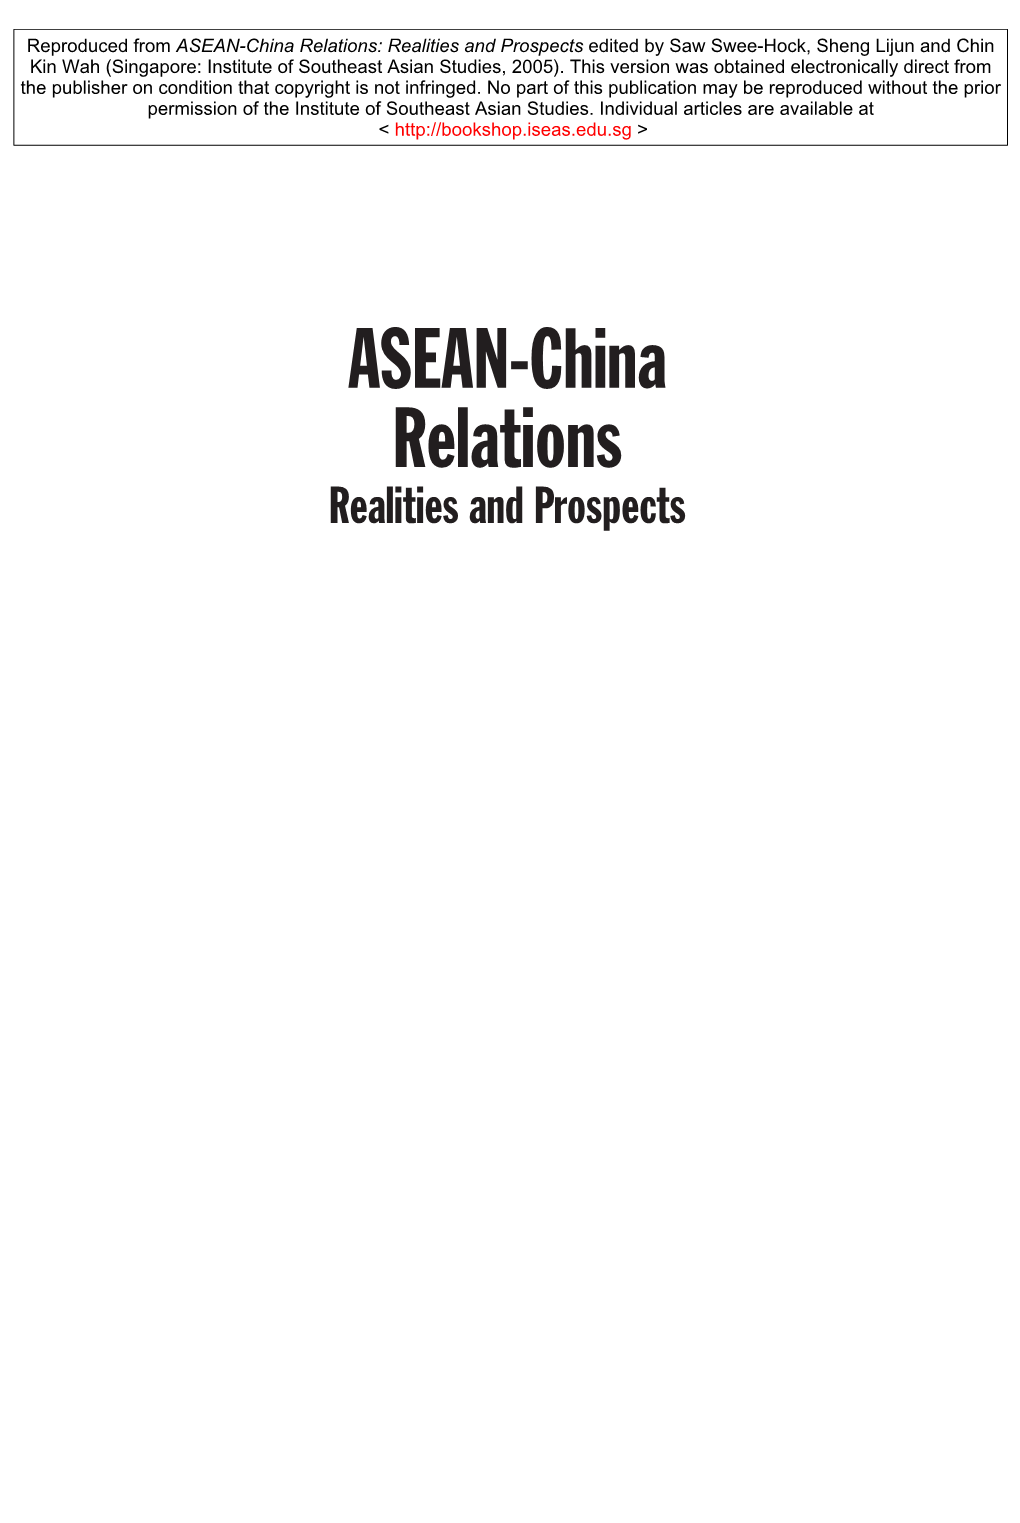 00 ASEAN-China Relations Prelim2 5/8/05, 8:59 AM ASEAN-China Relations Realities and Prospects